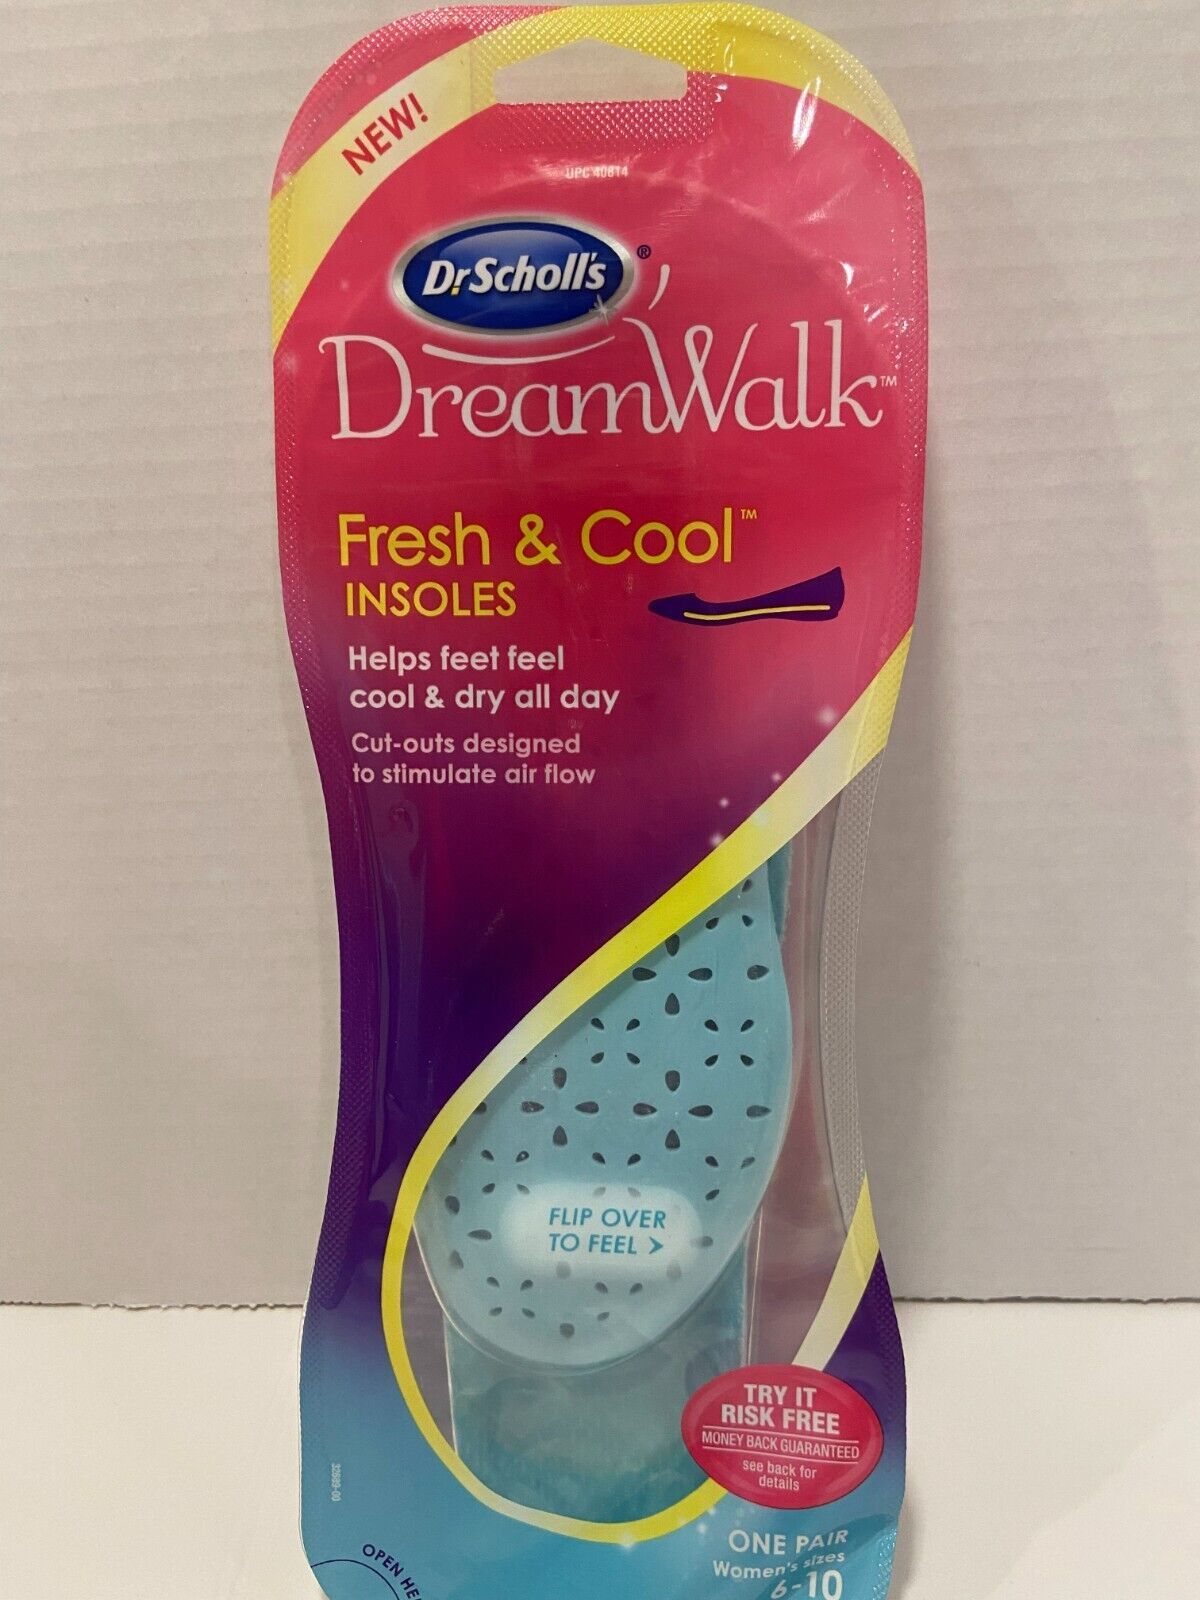 Primary image for Dr. Scholls DreamWalk Fresh & Cool Insoles Women's Size 6-10, One Pair New!